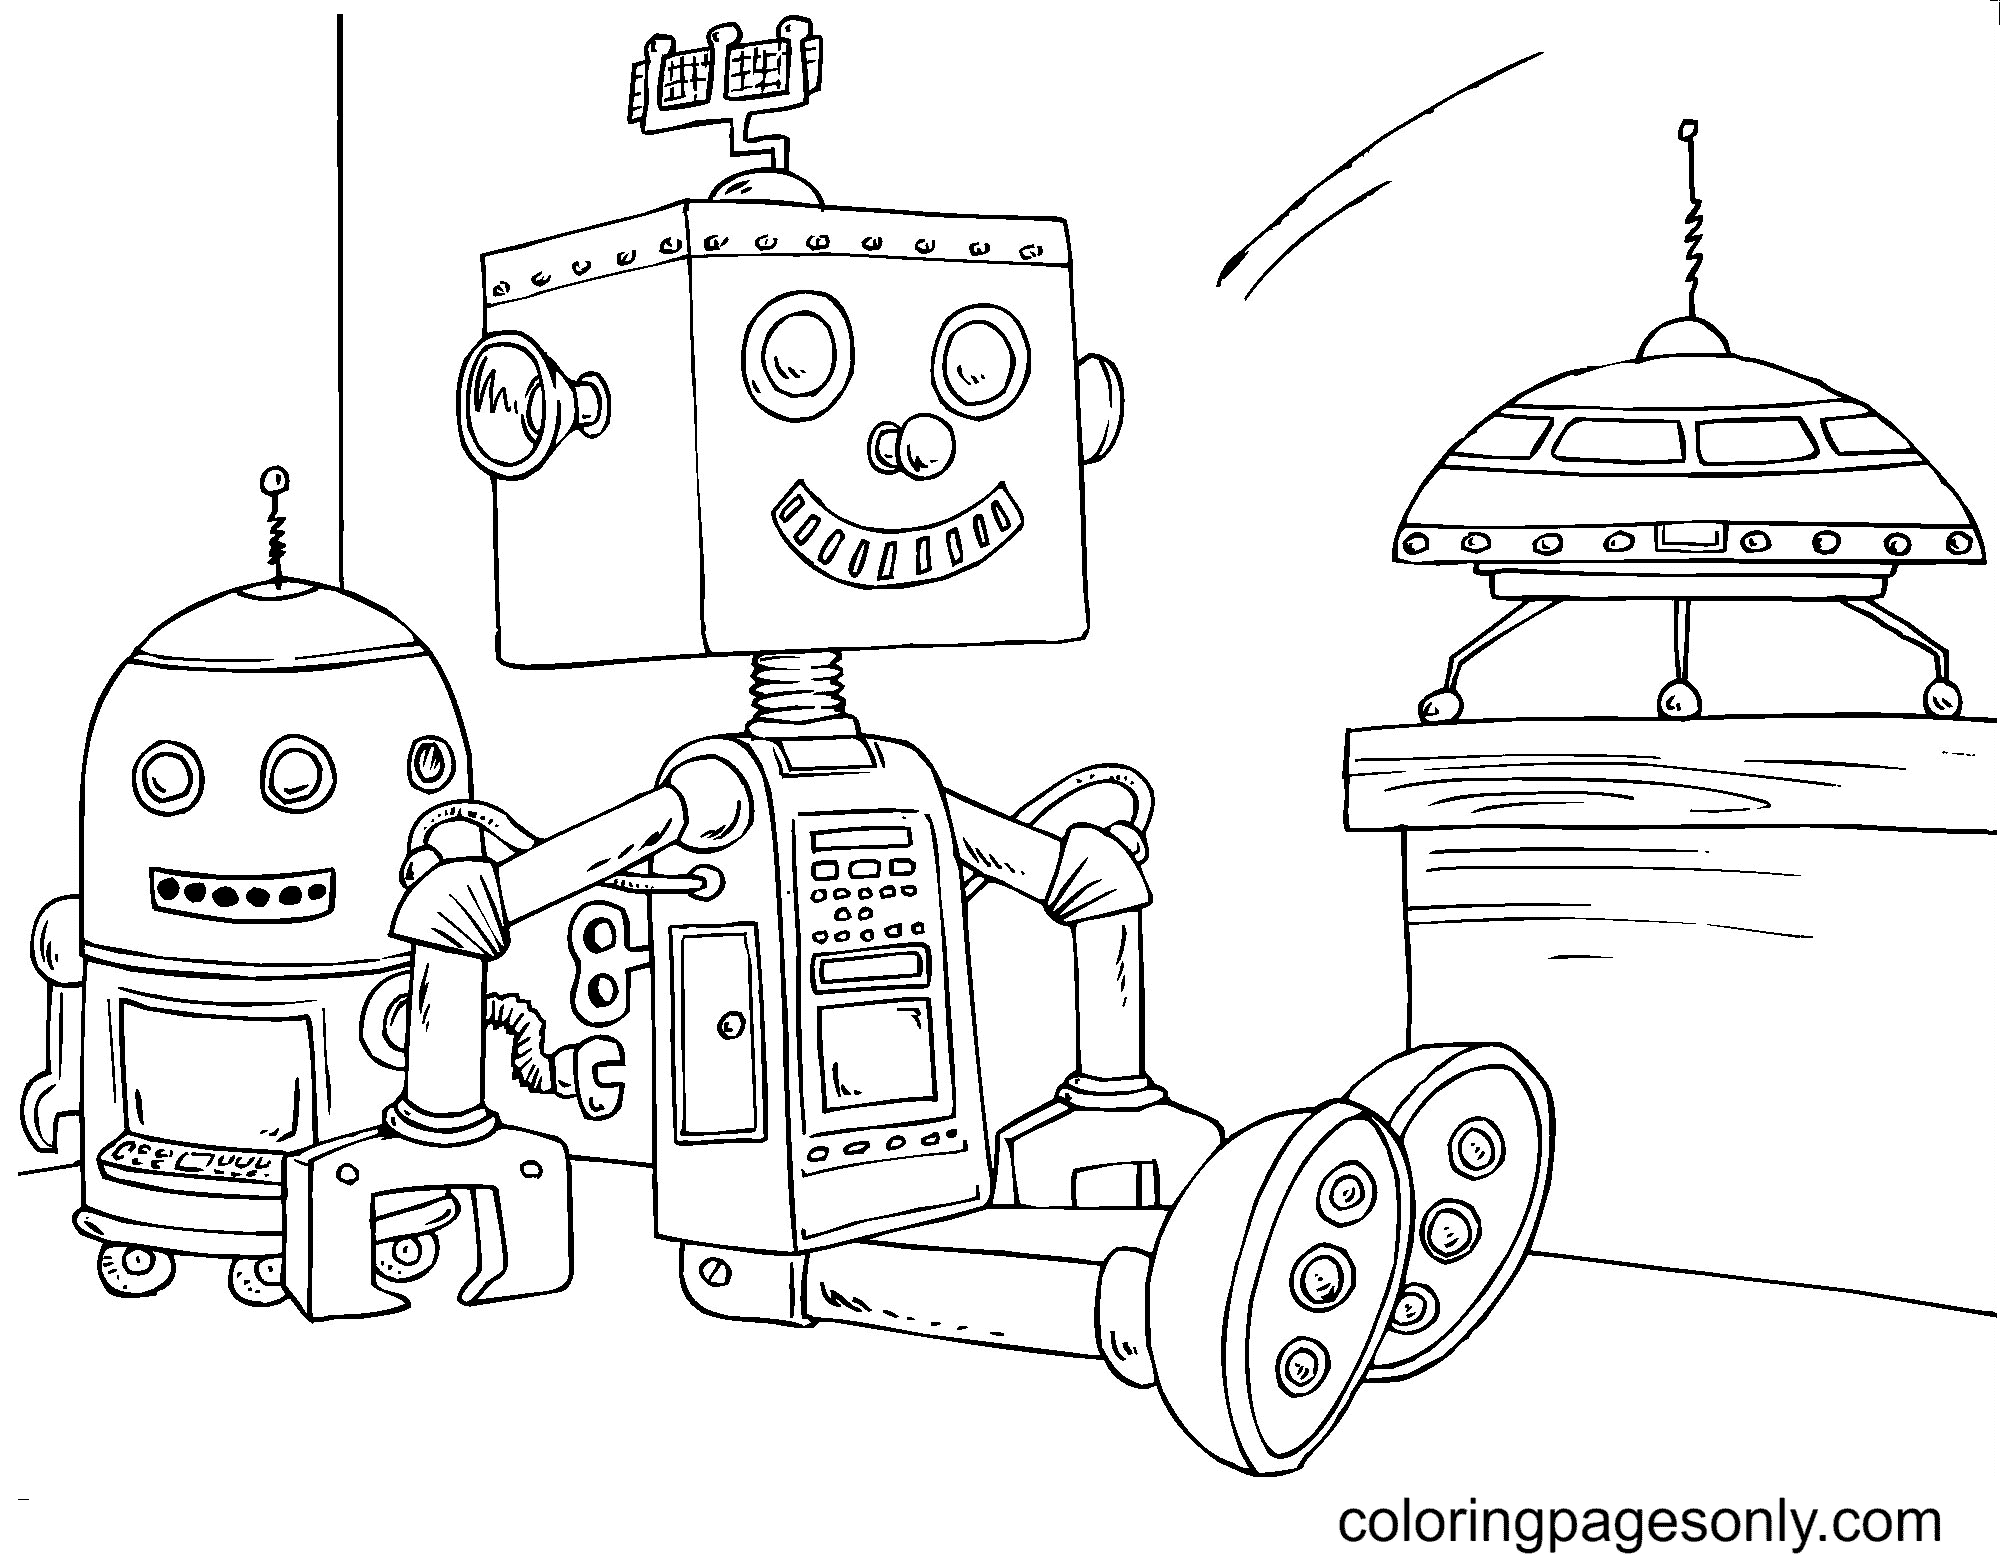 robot rob coloring pages robot coloring pages coloring pages for kids and adults